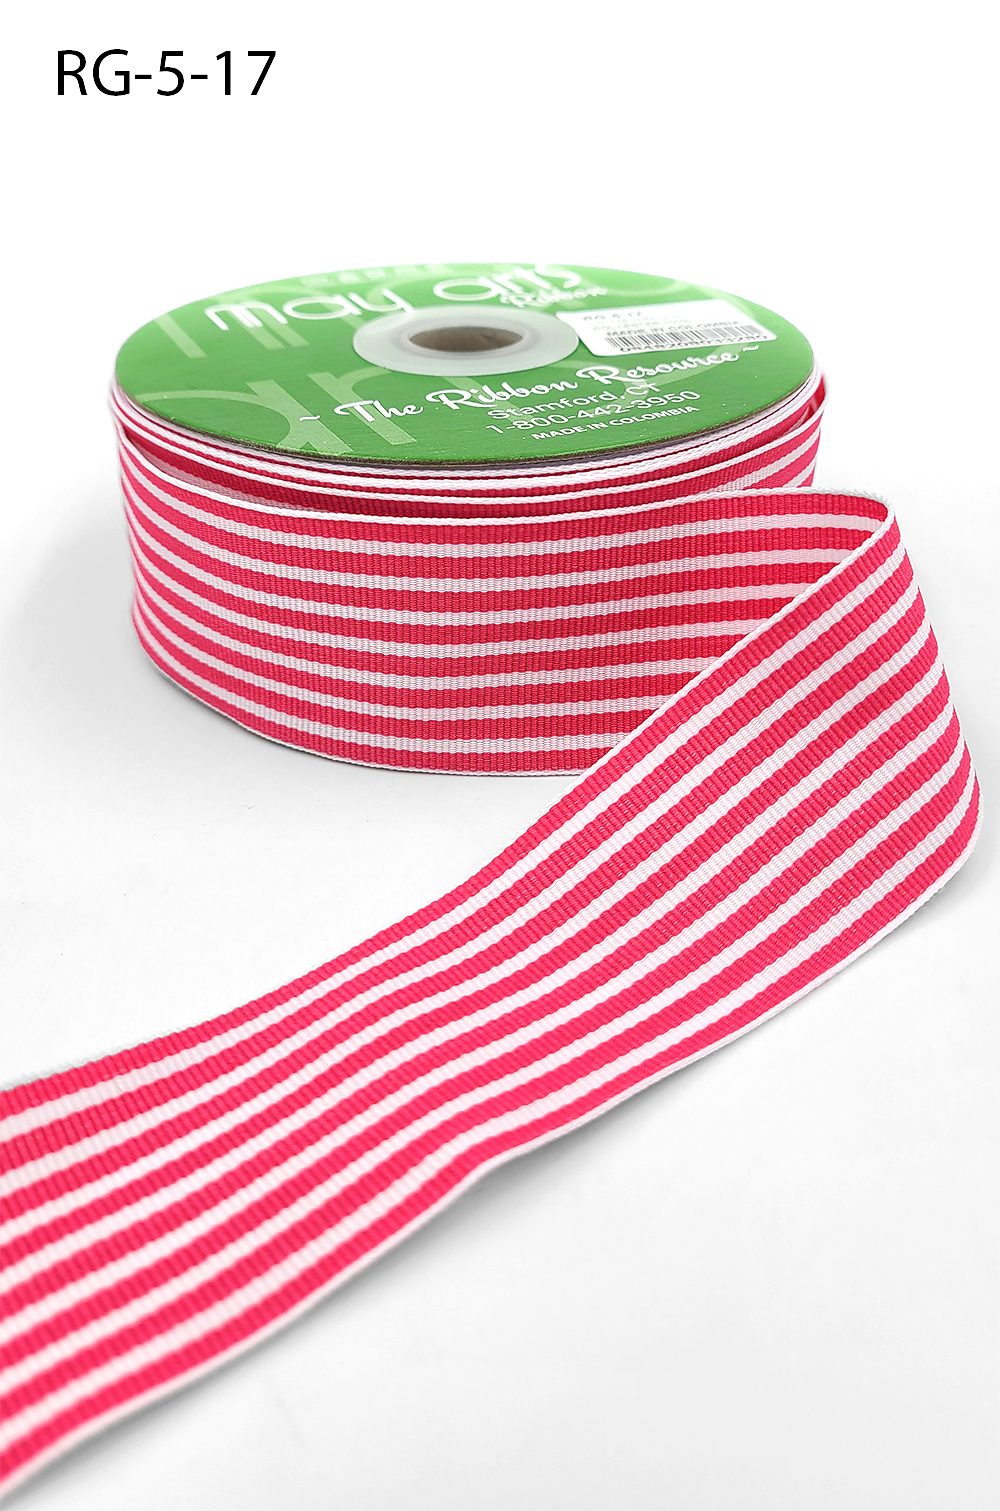 1-3/8 Red/White/Blue Striped Grosgrain Ribbon - 100 Yards - USA Made -  (Multiple Widths & Yardages Available)